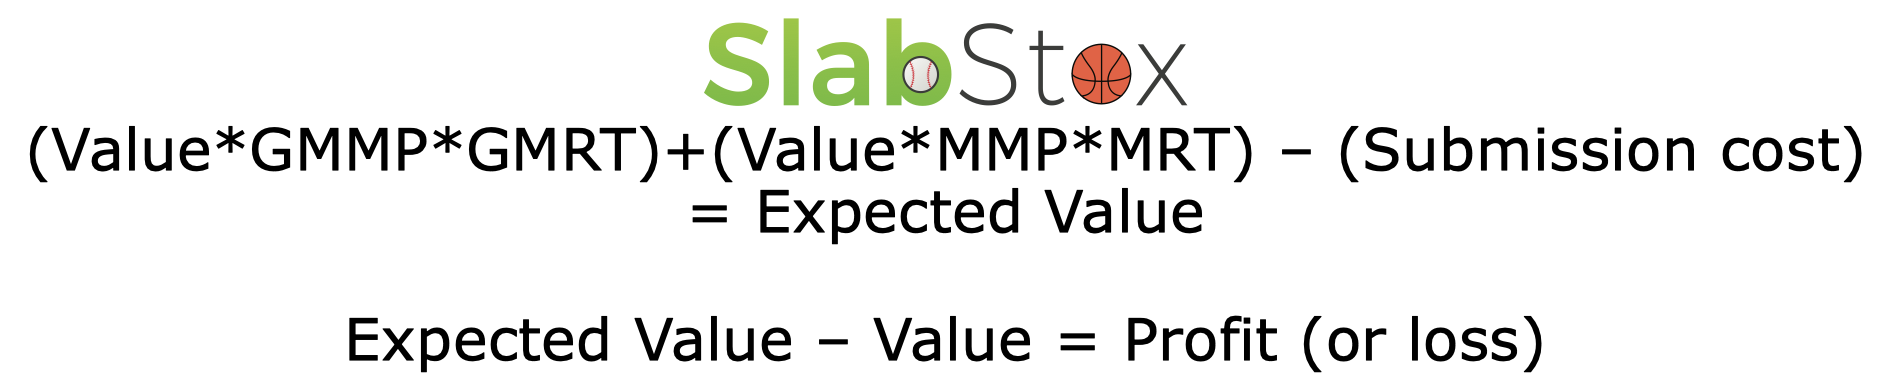 SlabStox formula for how to calculate sports trading card profits